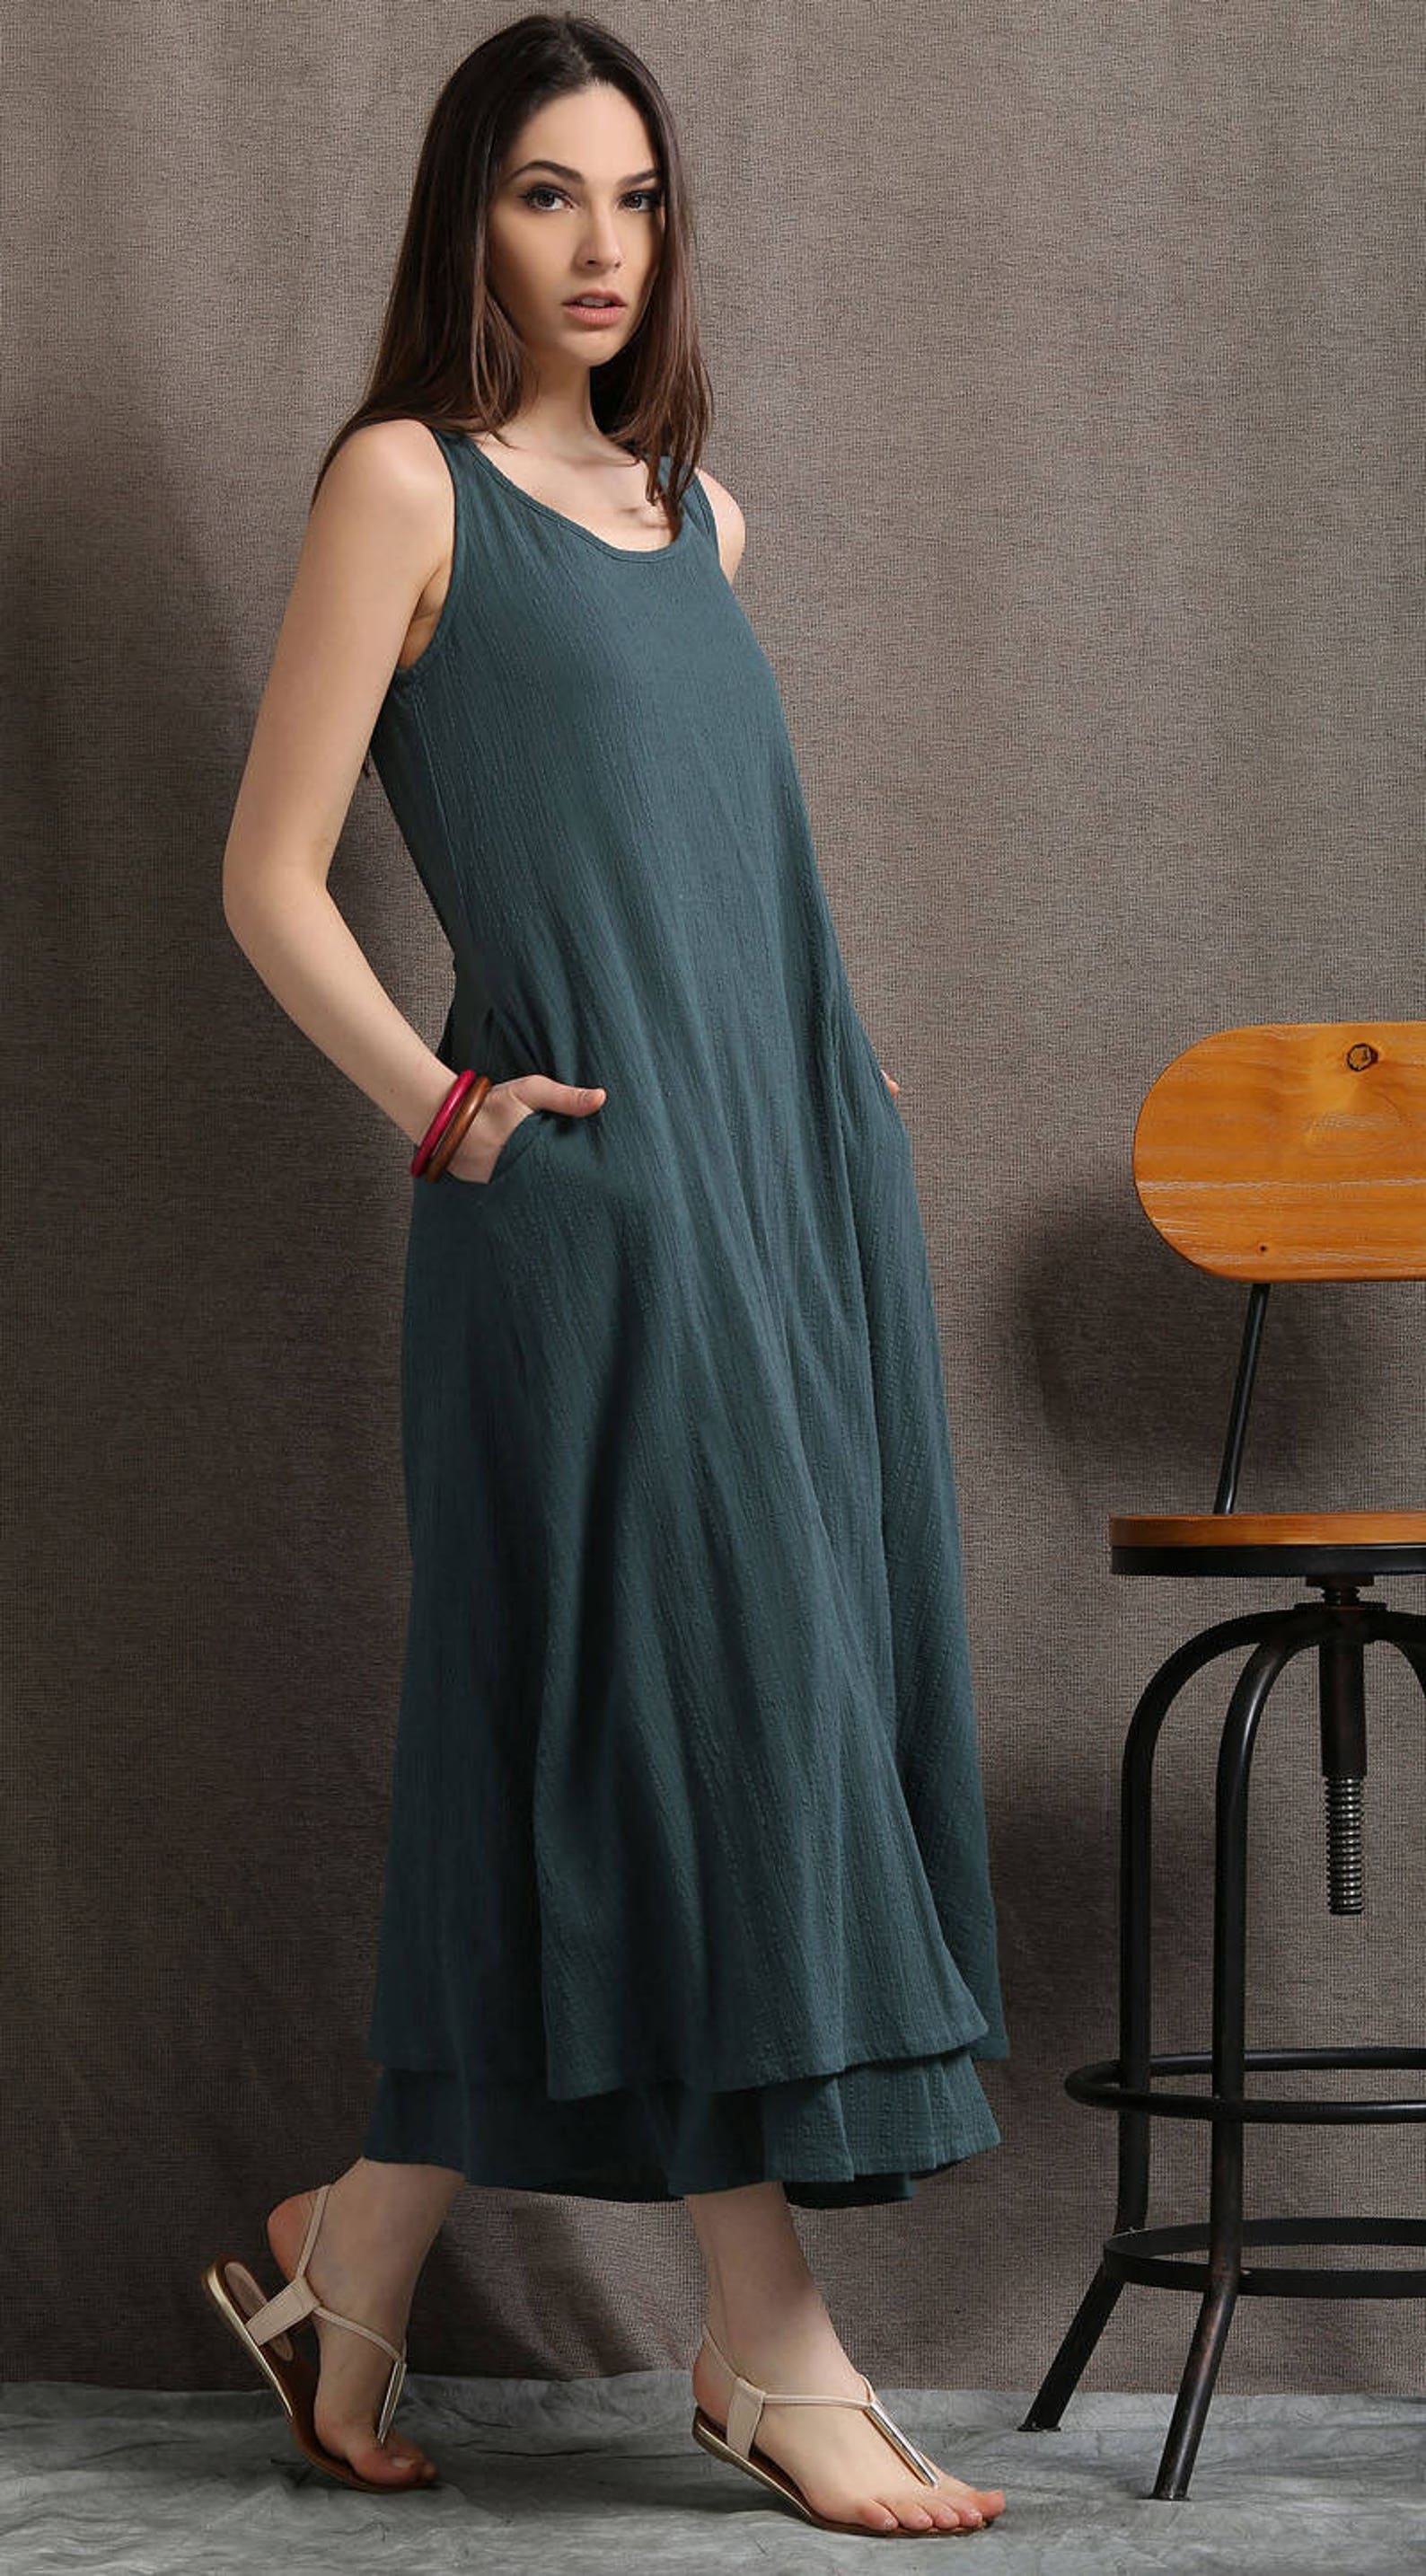 Layered Linen Maxi Dress Long Sage Green Casual Everyday | Etsy